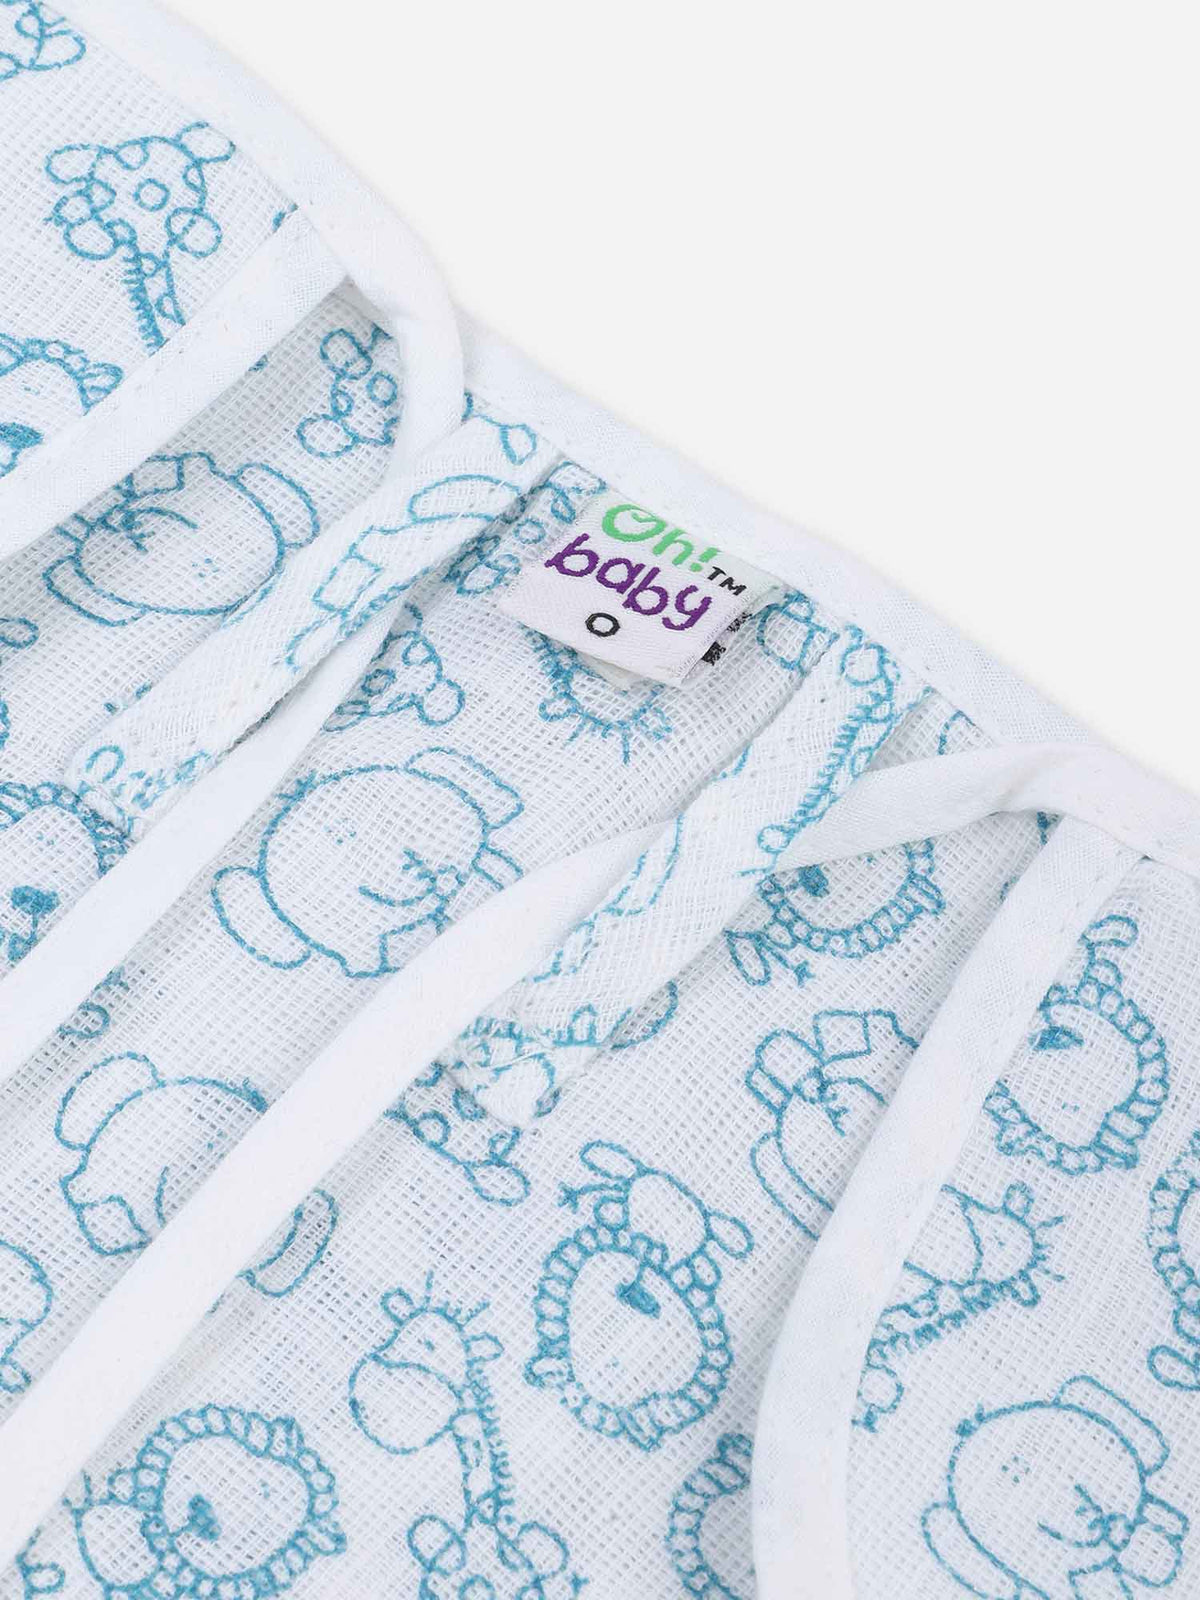 Oh Baby Printed Round Nappies Blue - Rdpr